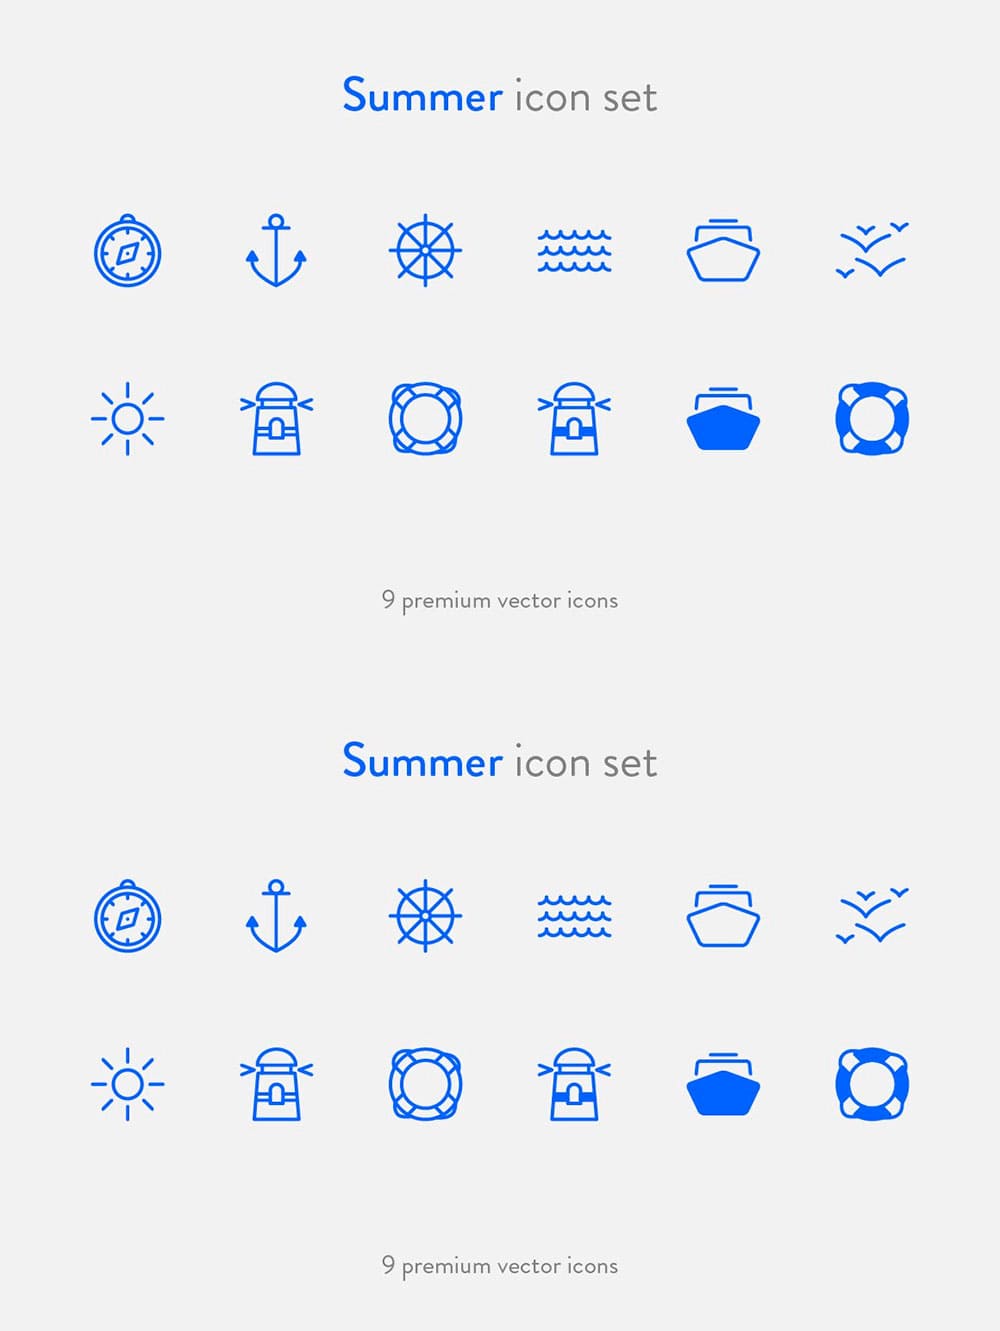 Summer icons, picture for pinterest.